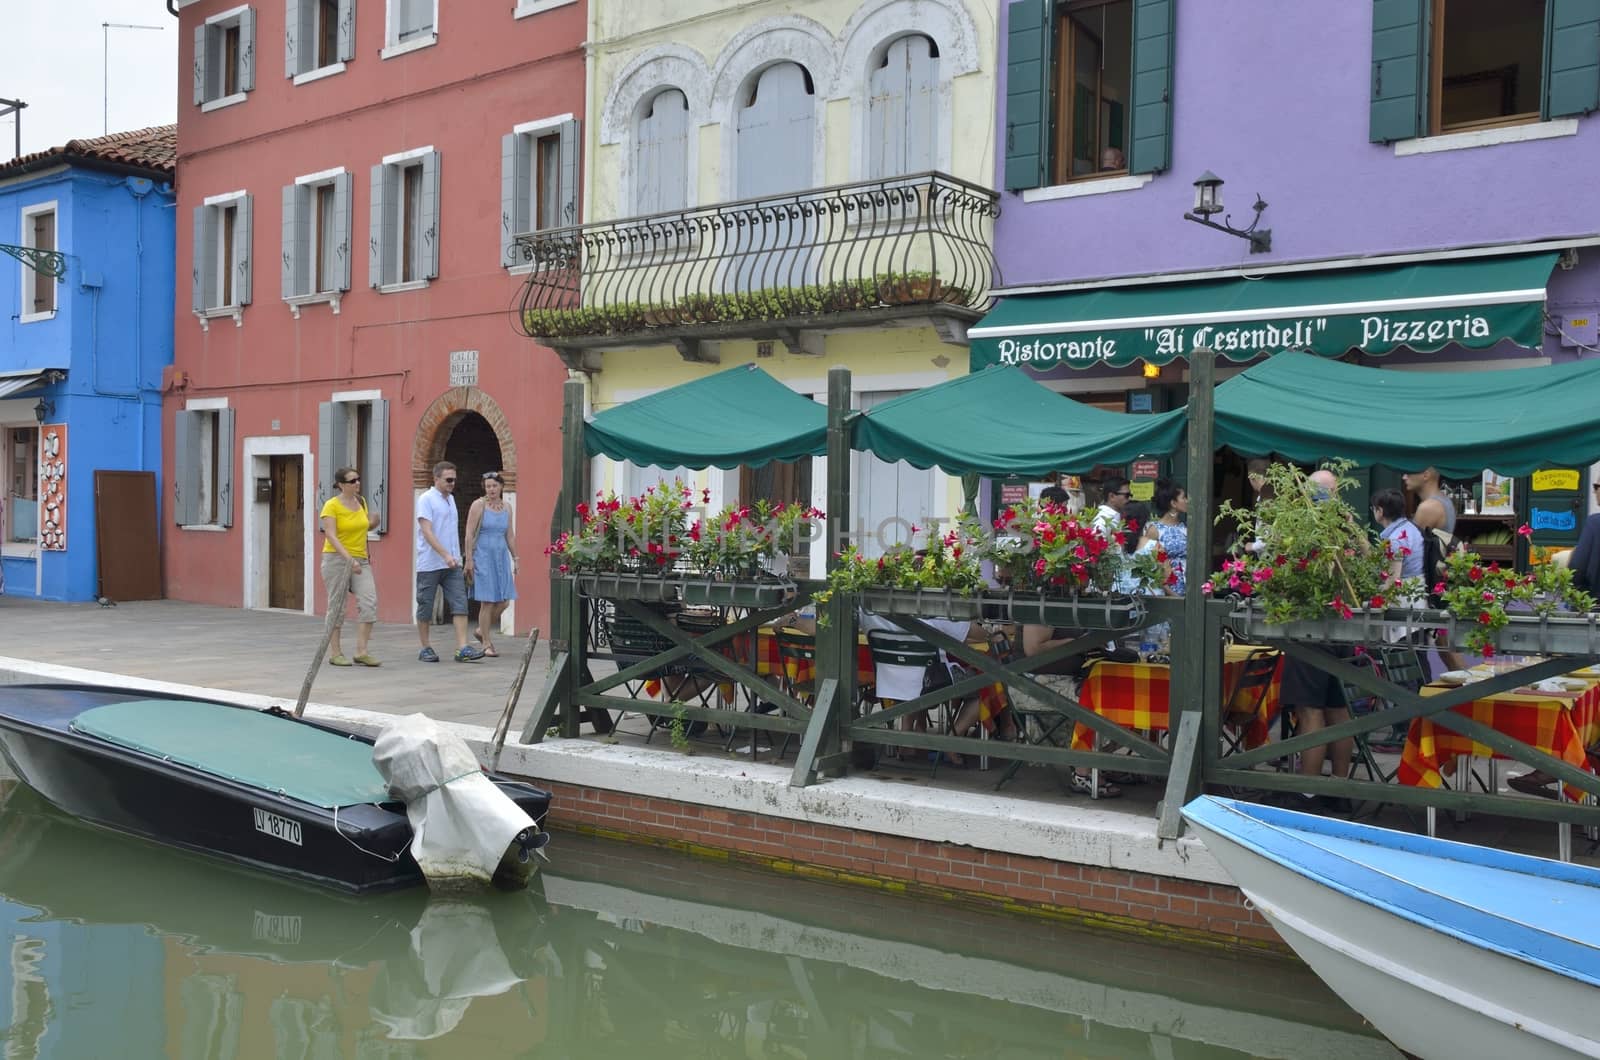 Some people walking by a way along a small canal in Burano, a colorful island of Venice, Italy